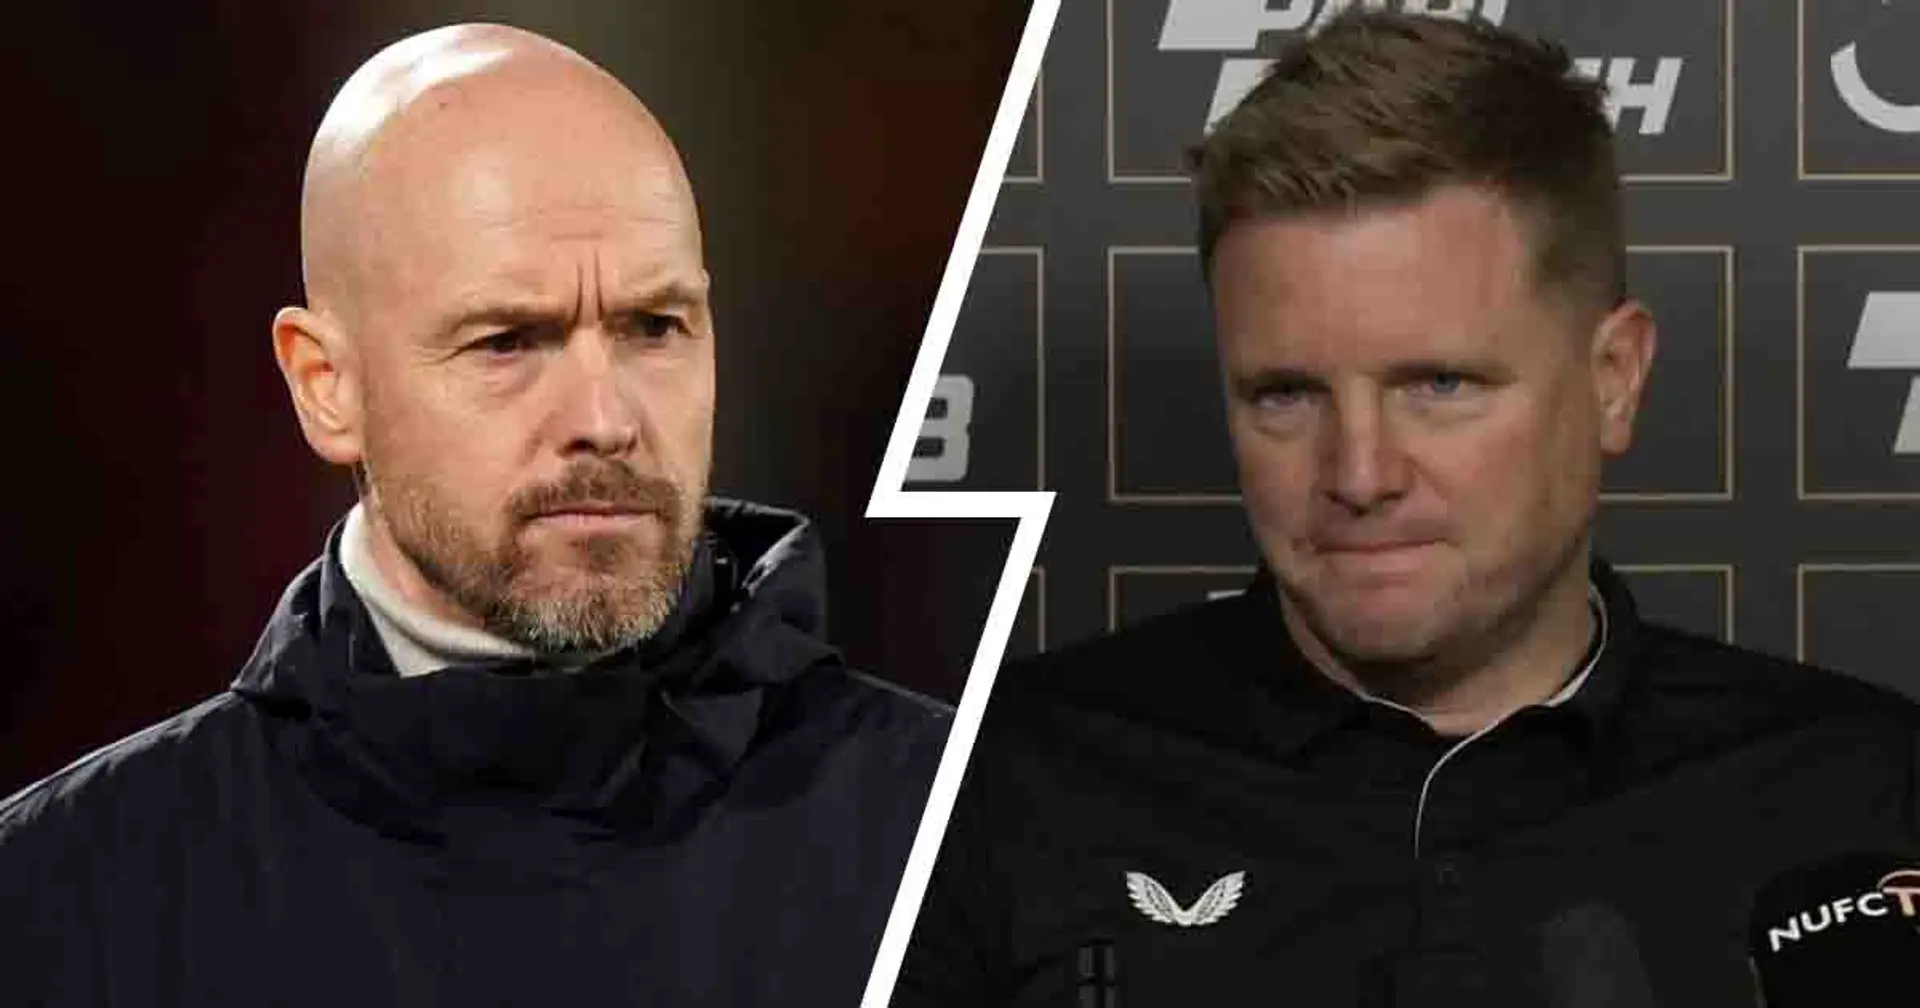 'We want to be a good football team': Eddie Howe responds to Ten Hag's ‘annoying’ claims